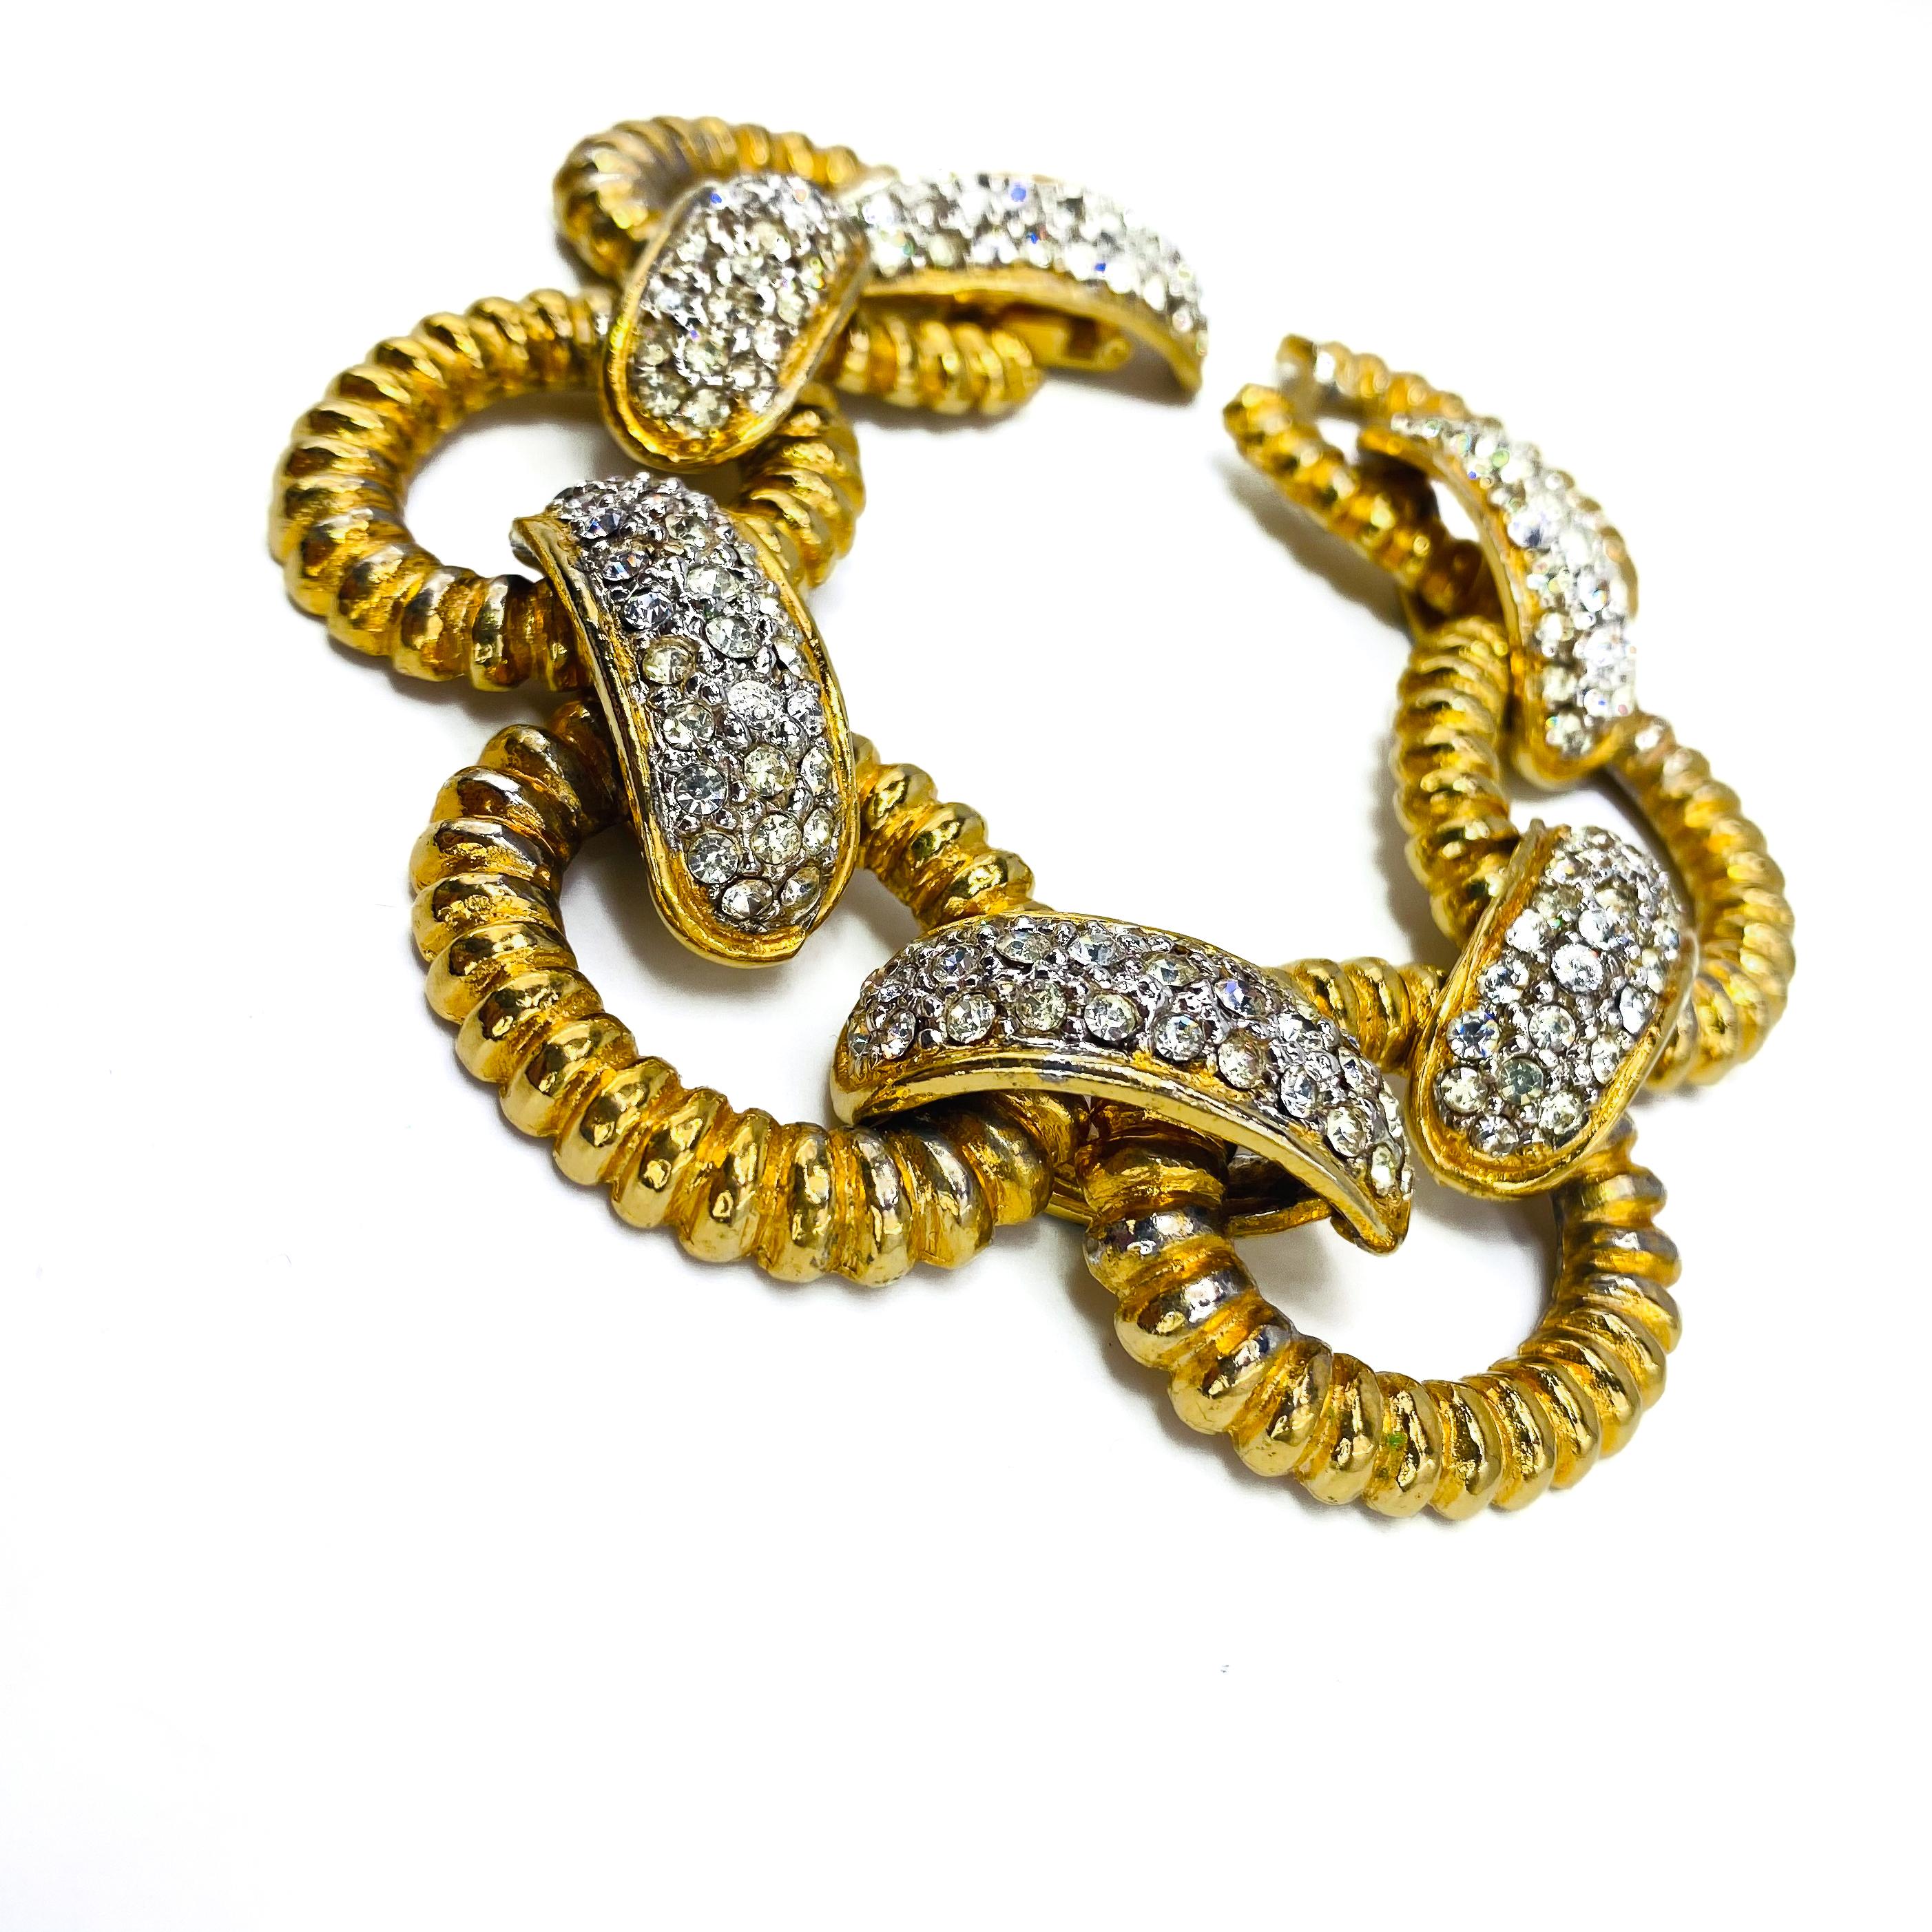 Kenneth Jay Lane Vintage 1980s Bracelet
Timelessly classic 80s piece from the world's most famous costume jeweller

Detail
-Crafted from gold plated metal and set with tiny crystals
-Made in the United States in the 1980s
-Chunky textured